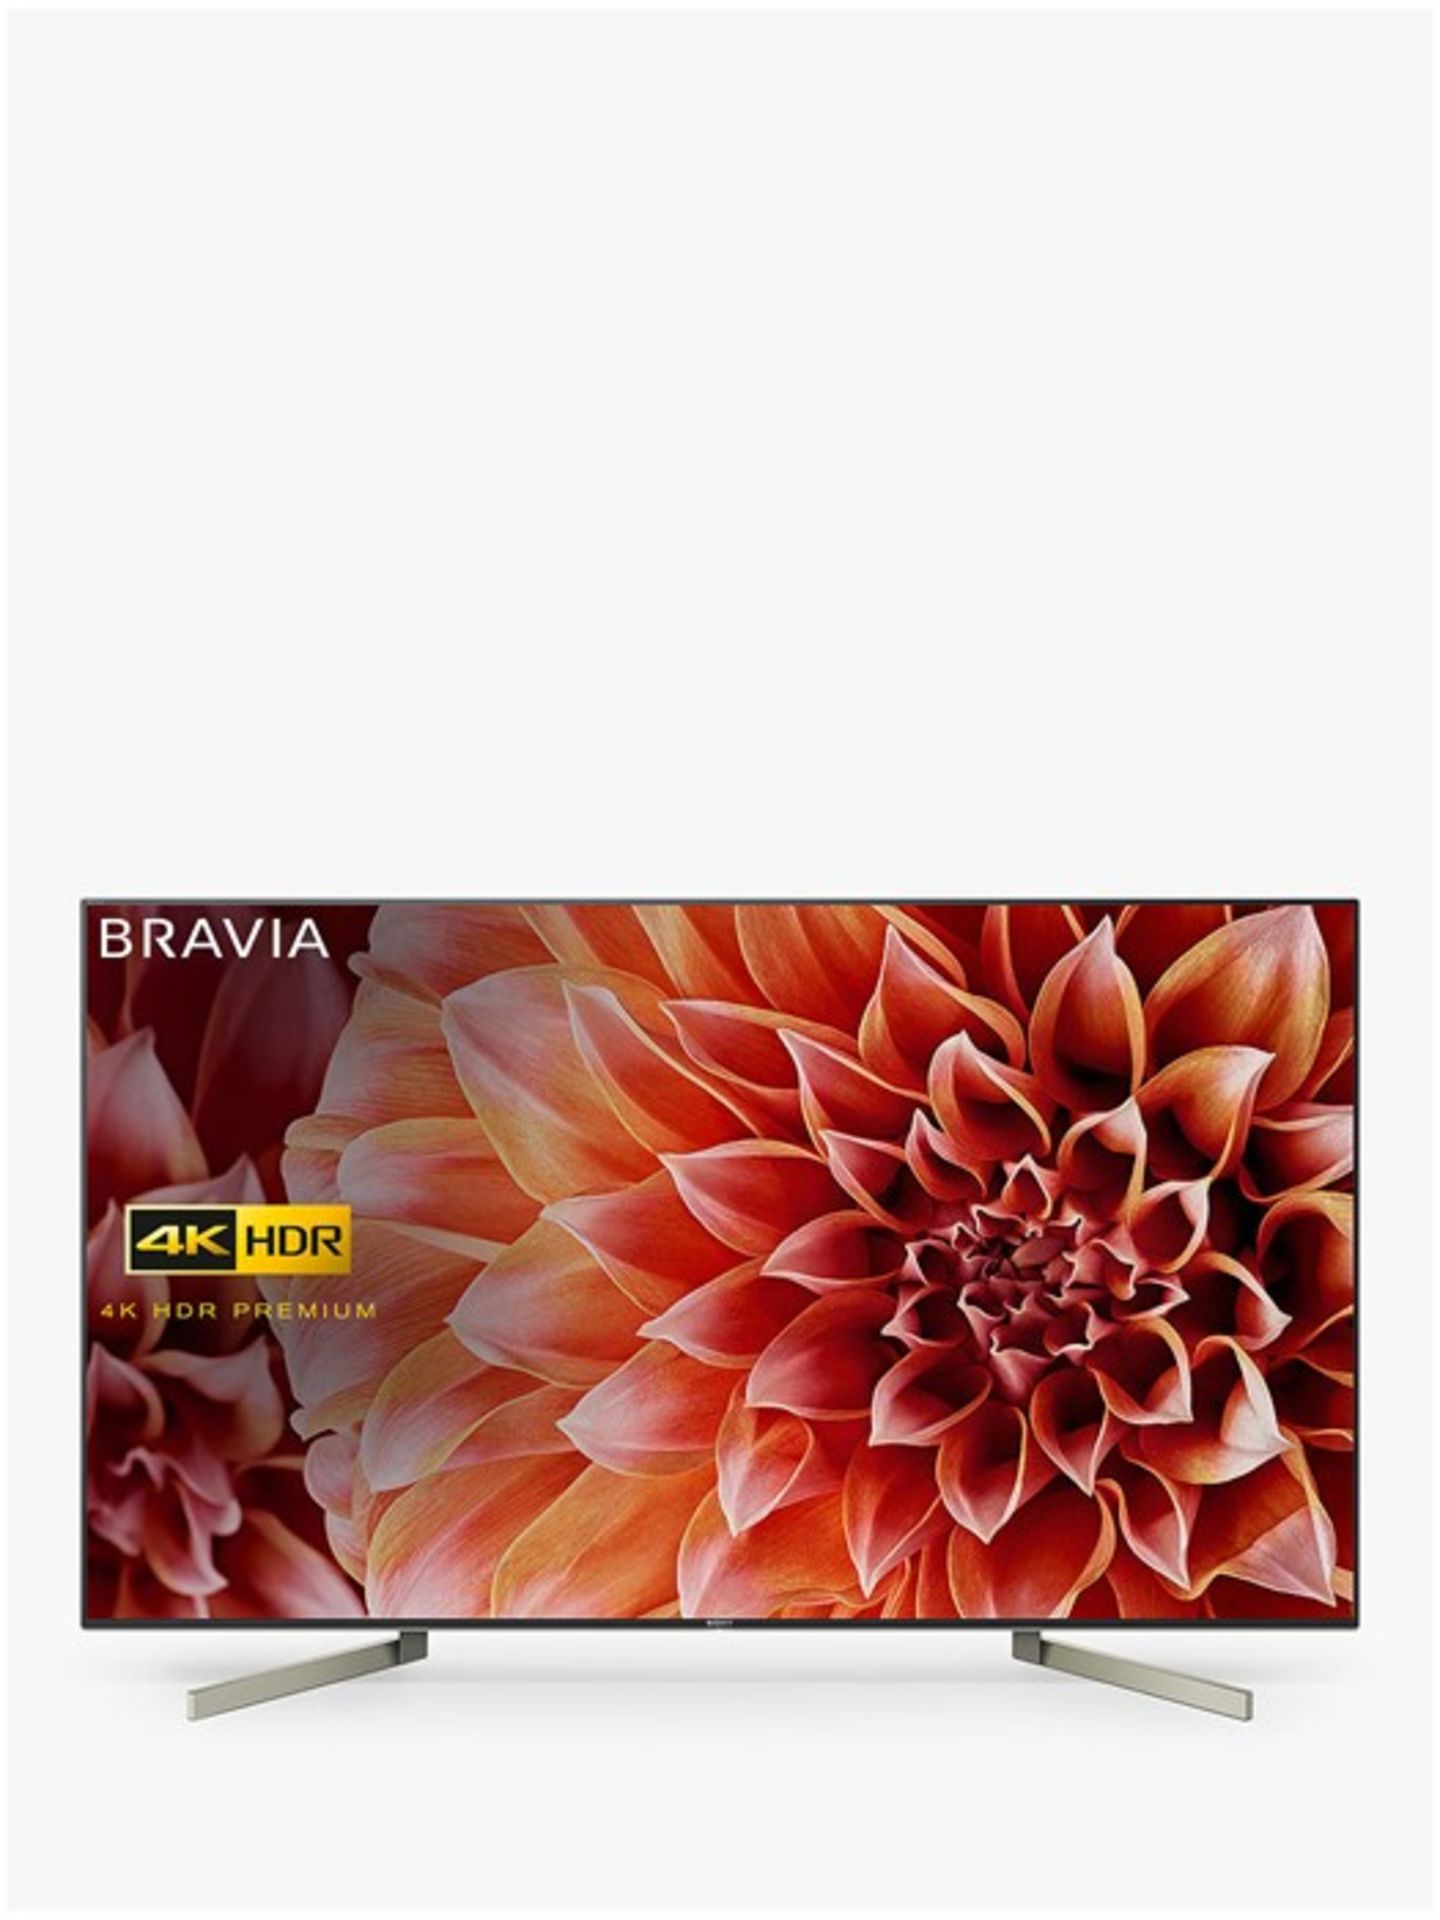 Sony Bravia KD49XF9005 LED HDR 4K Ultra HD Smart Android TV, 49" with Freeview HD & Youview,